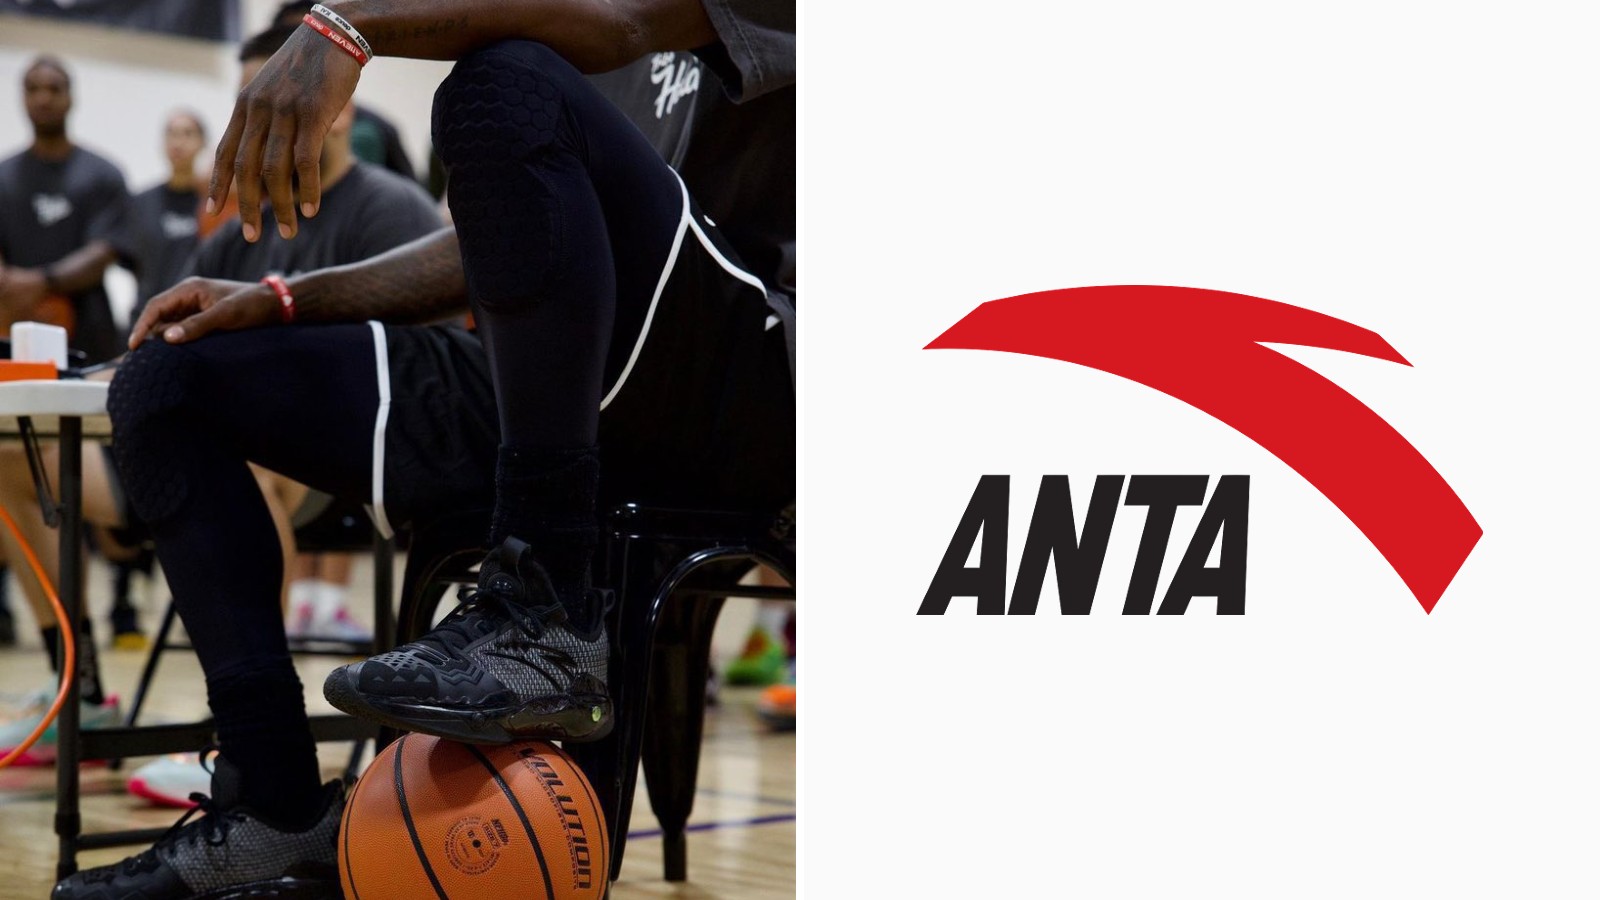 Kyrie Irving Has Been Wearing This Shoe: Anta Shock Wave 5 